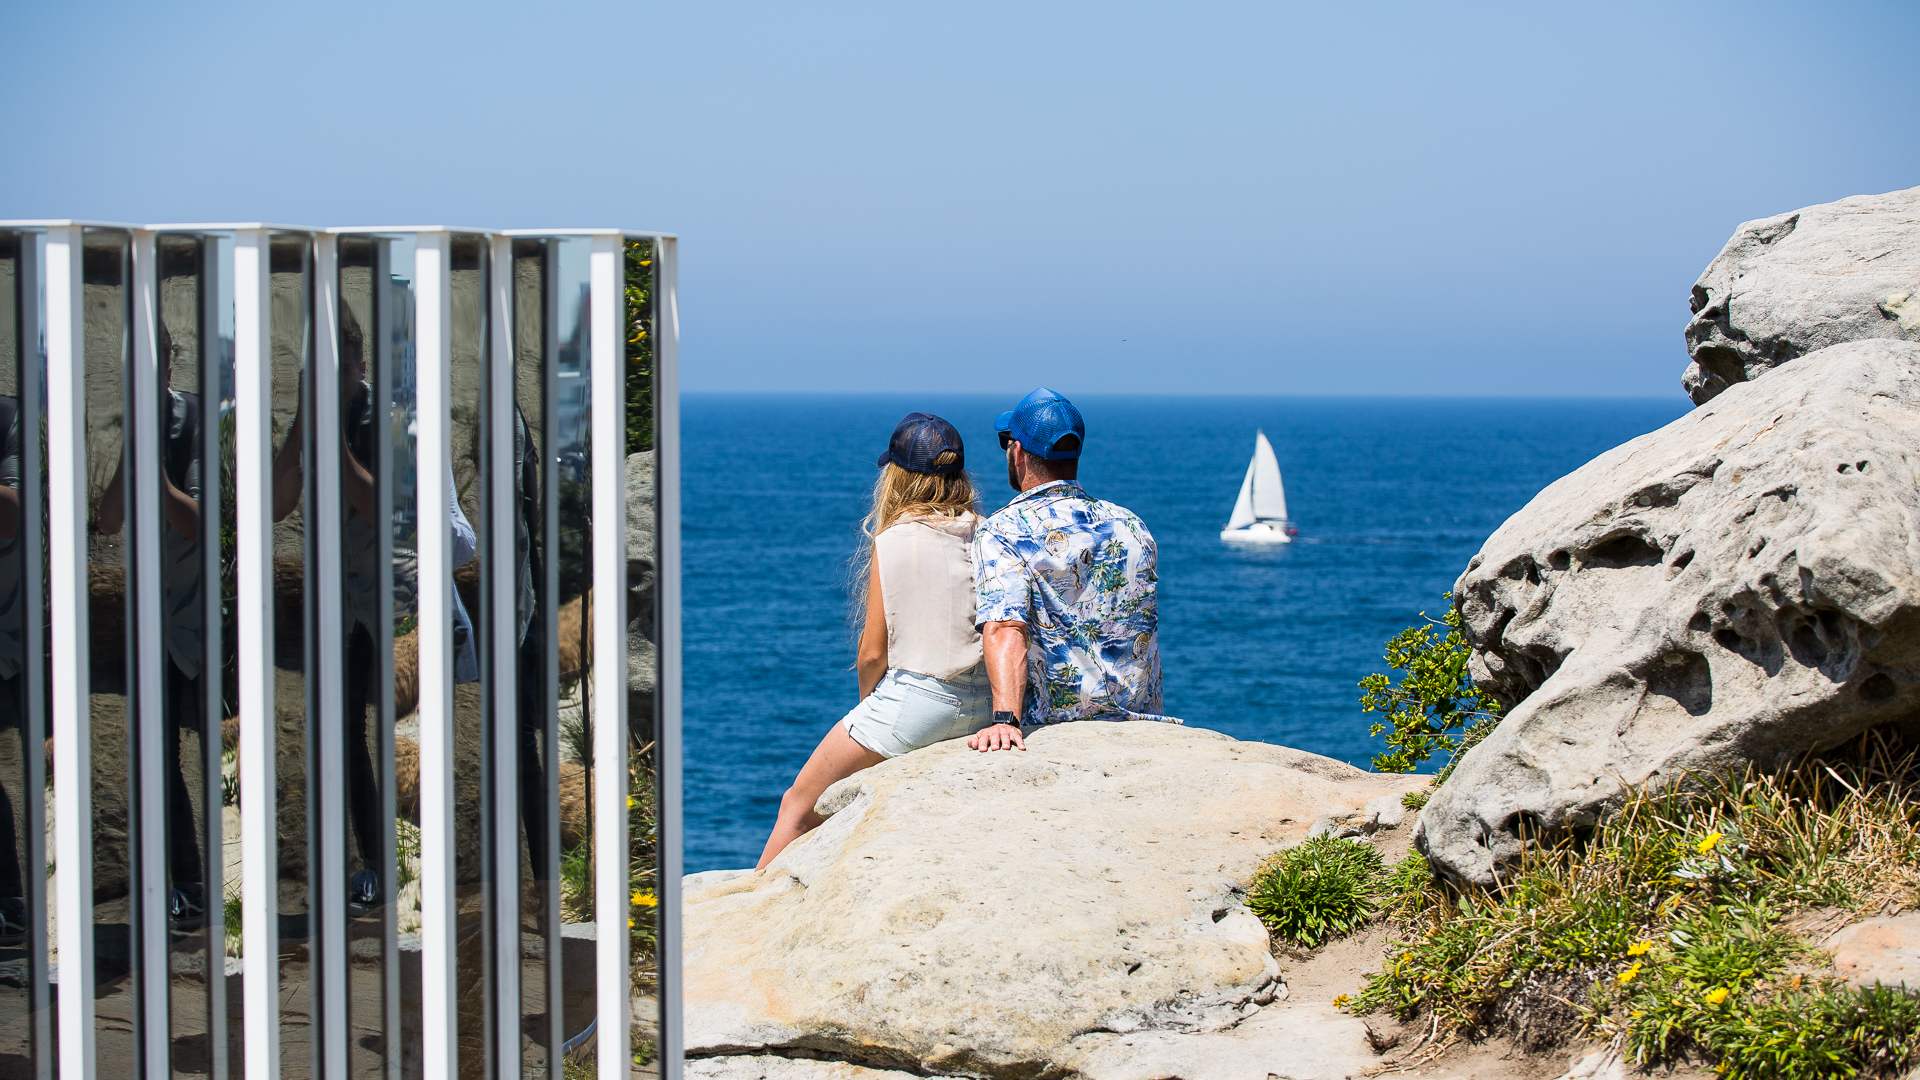 Six Stunning Works to Ogle at Sculpture by the Sea 2019